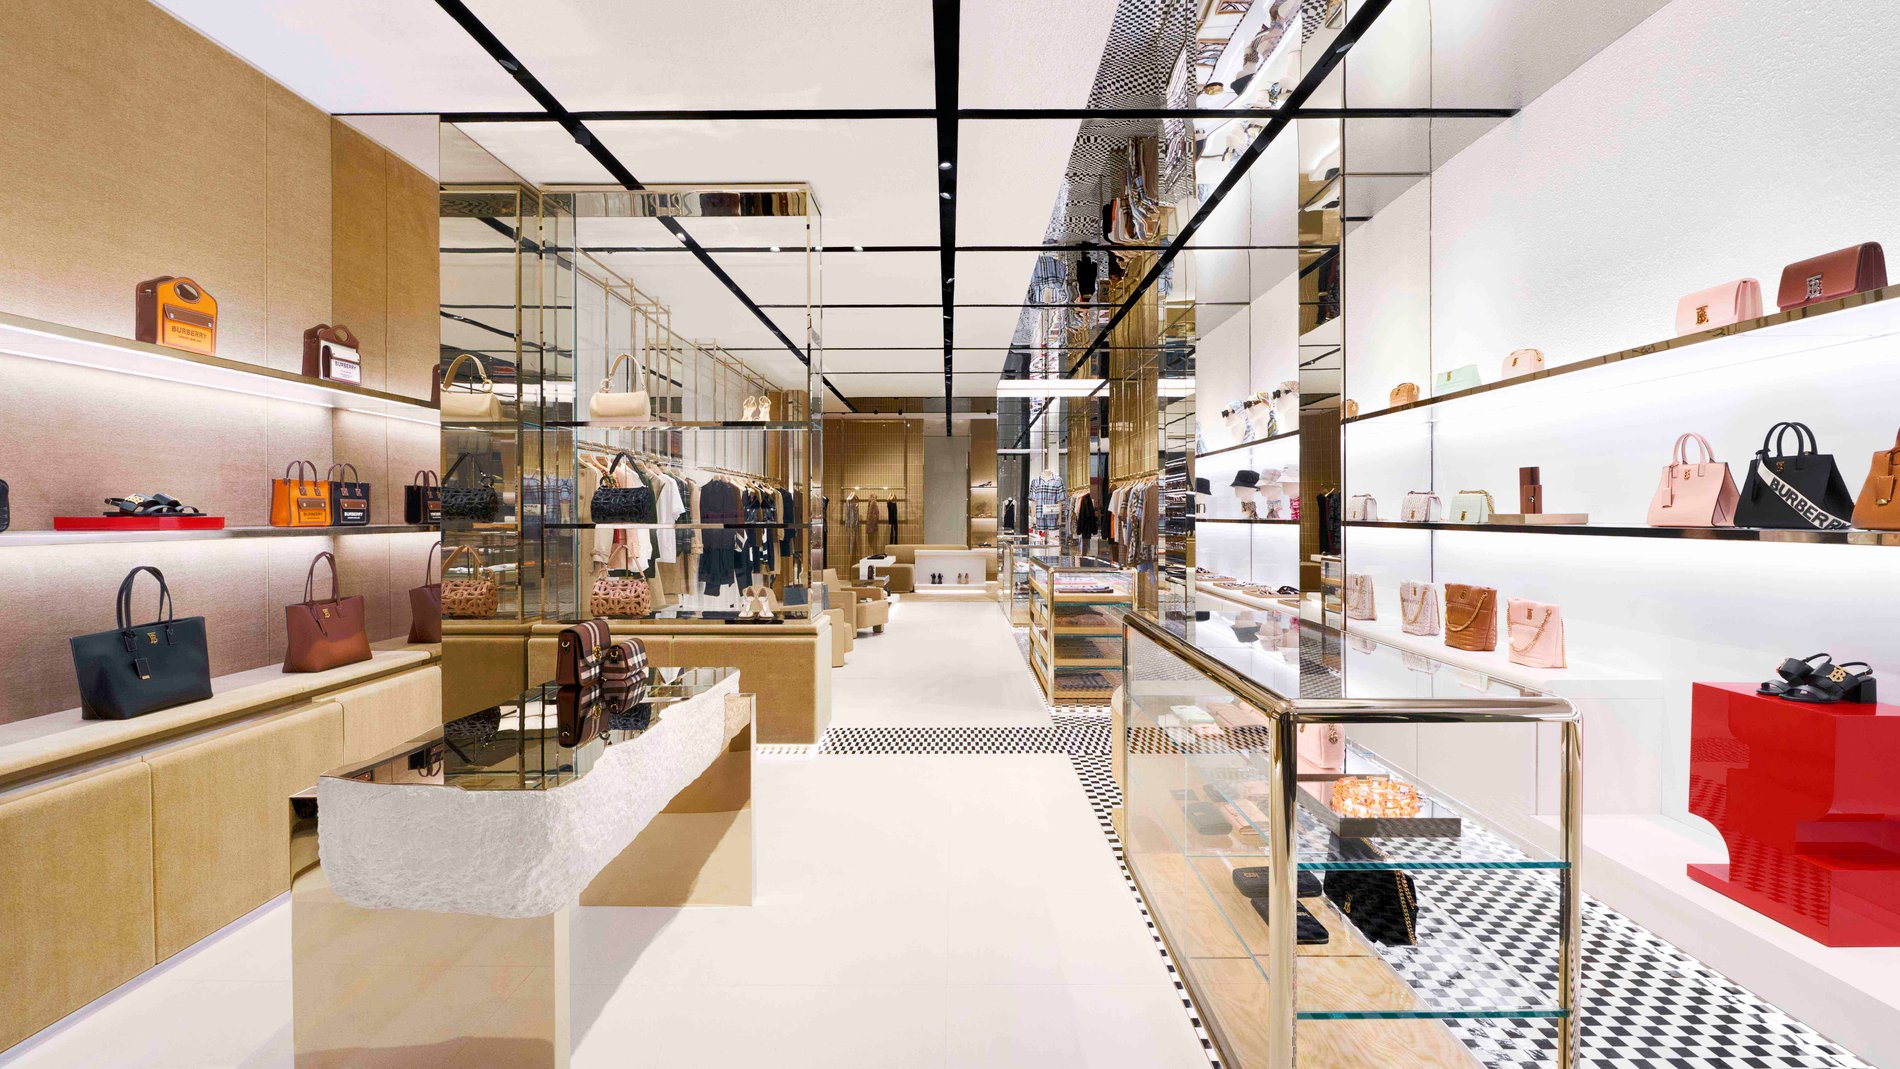 Burberry store close-up with shoes and bags on shelves.